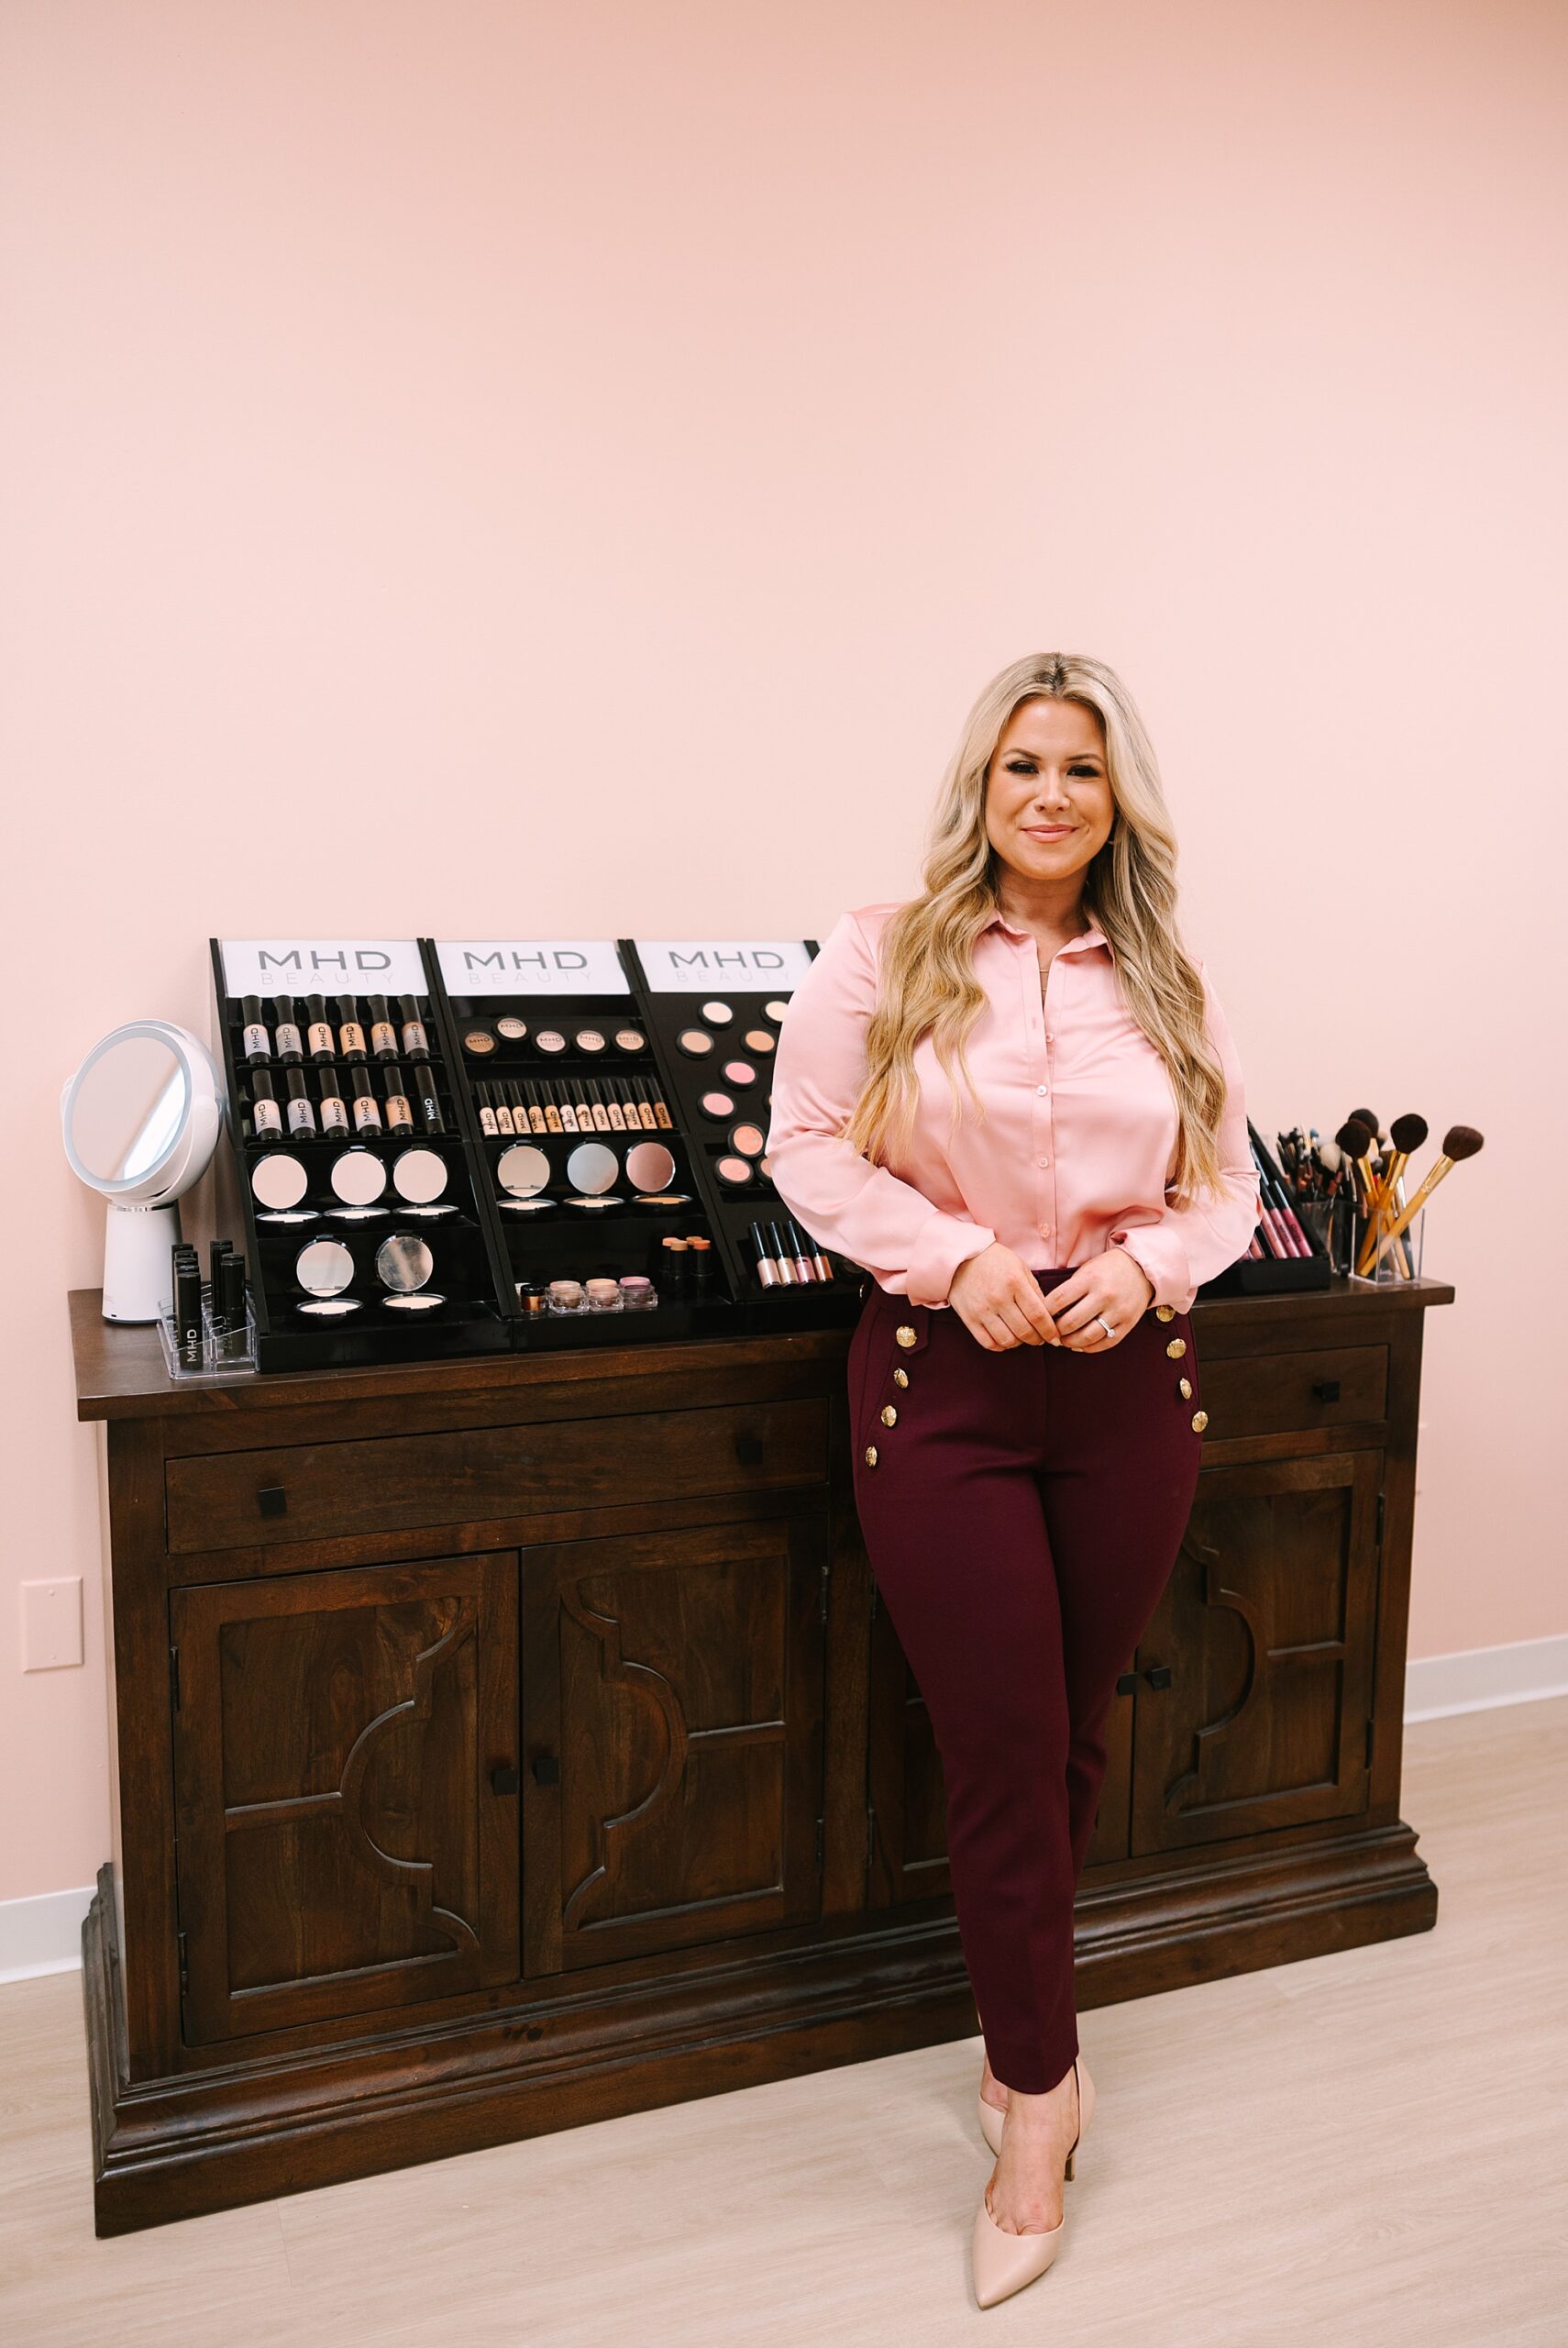 blonde woman in pink top leans against lipstick display in salon